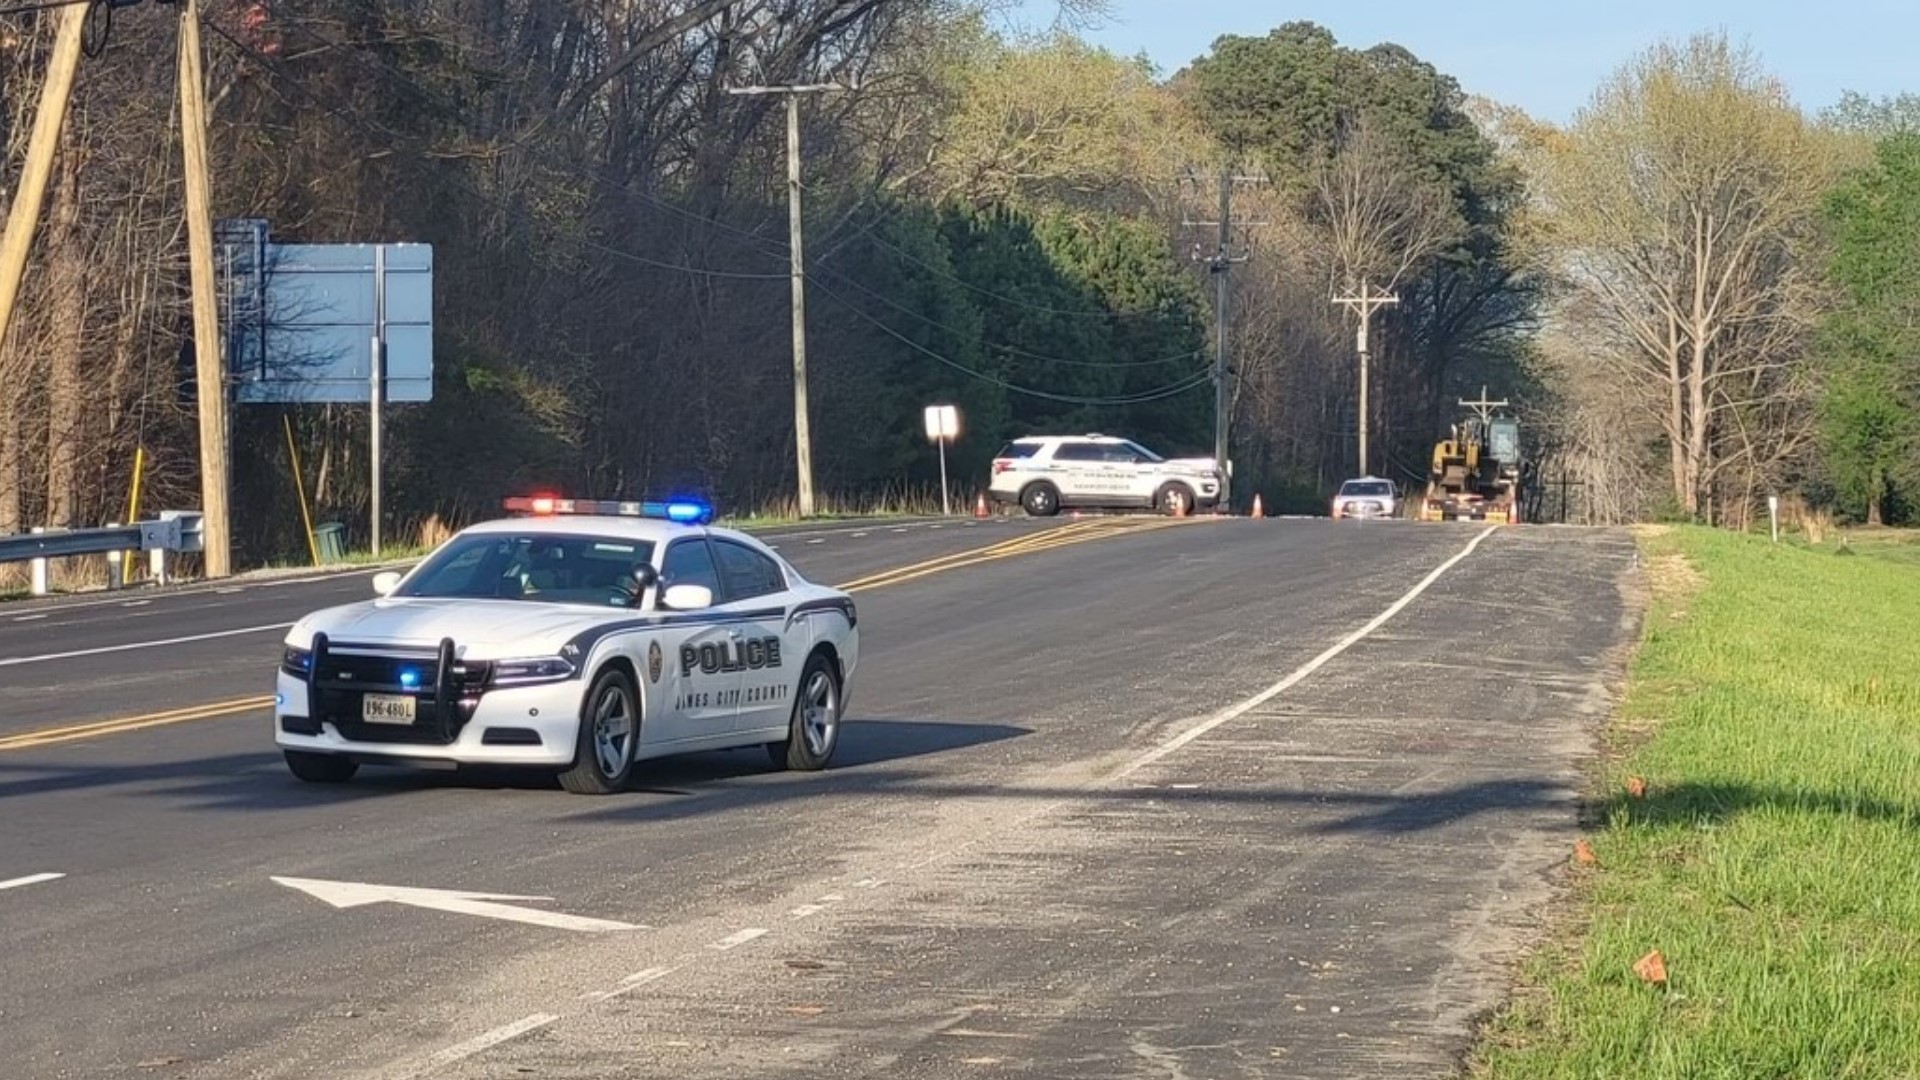 Warwick Boulevard is closed at the Newport News-James City County line, and officials say it's likely to be several hours before it reopens.